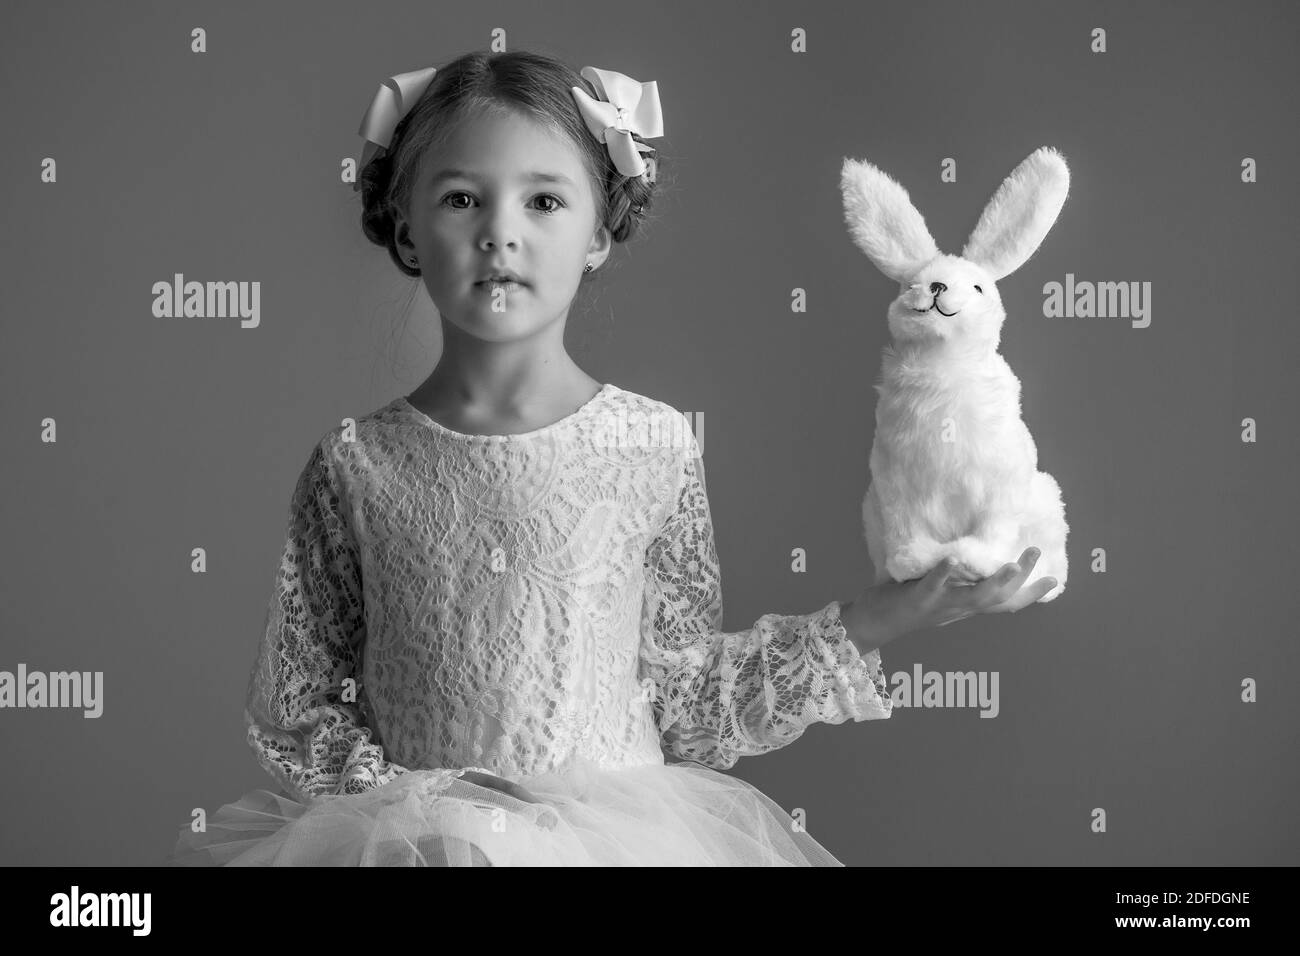 A GIRL AND HER STUFFED RABBIT, CHILD AND PET, STUDIO PORTRAIT Stock Photo